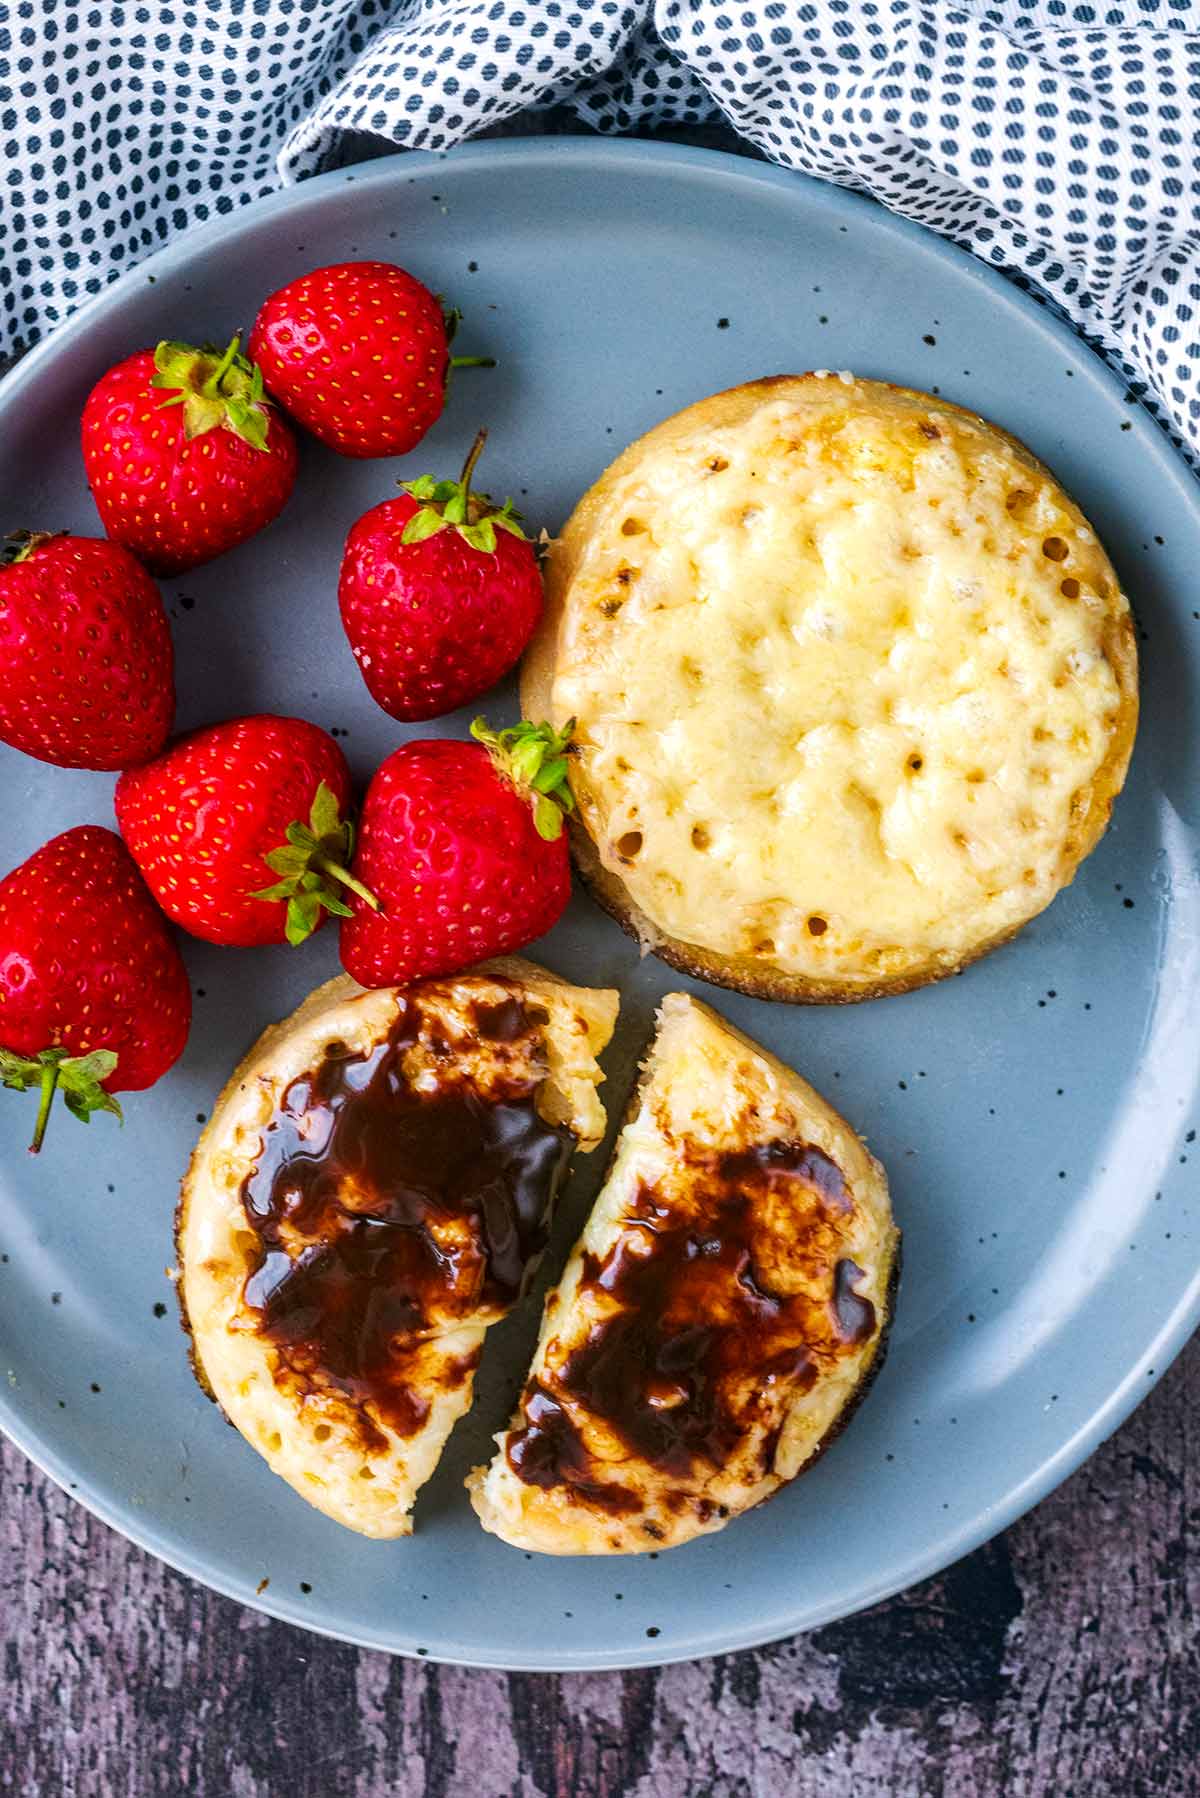 Two cheesy crumpets on a plate, one has marmite spread on it.